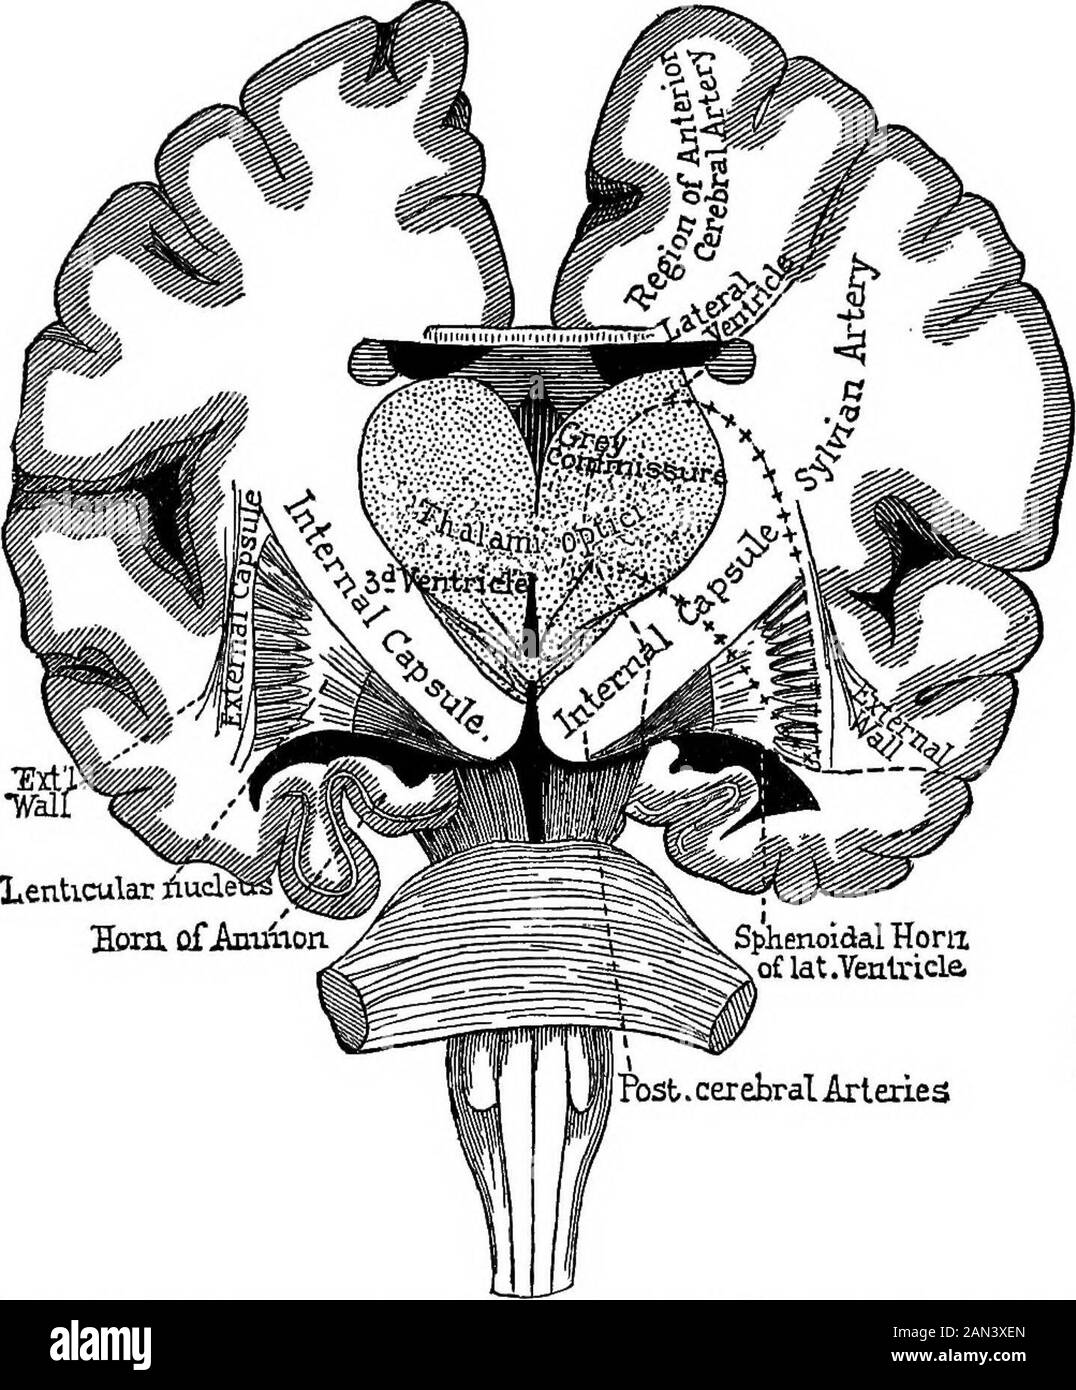 Lectures on localization in diseases of the brain, delivered at the Faculté de médecine, Paris, 1875 . which the vascular ter-ritories are separated by dotted lines, will make the detailsclearer. The description of the striated arteries alone requires someexplanation. With this you will possess, in brief, all that isnecessary to a knowledge of the central arteries, whether theycome from the anterior or the posterior cerebral arteries. Emanating from the superior border of the Sylvian artery,the striated arteries enter the apertures of the anterior per-forated space, where they soon disappear Stock Photo